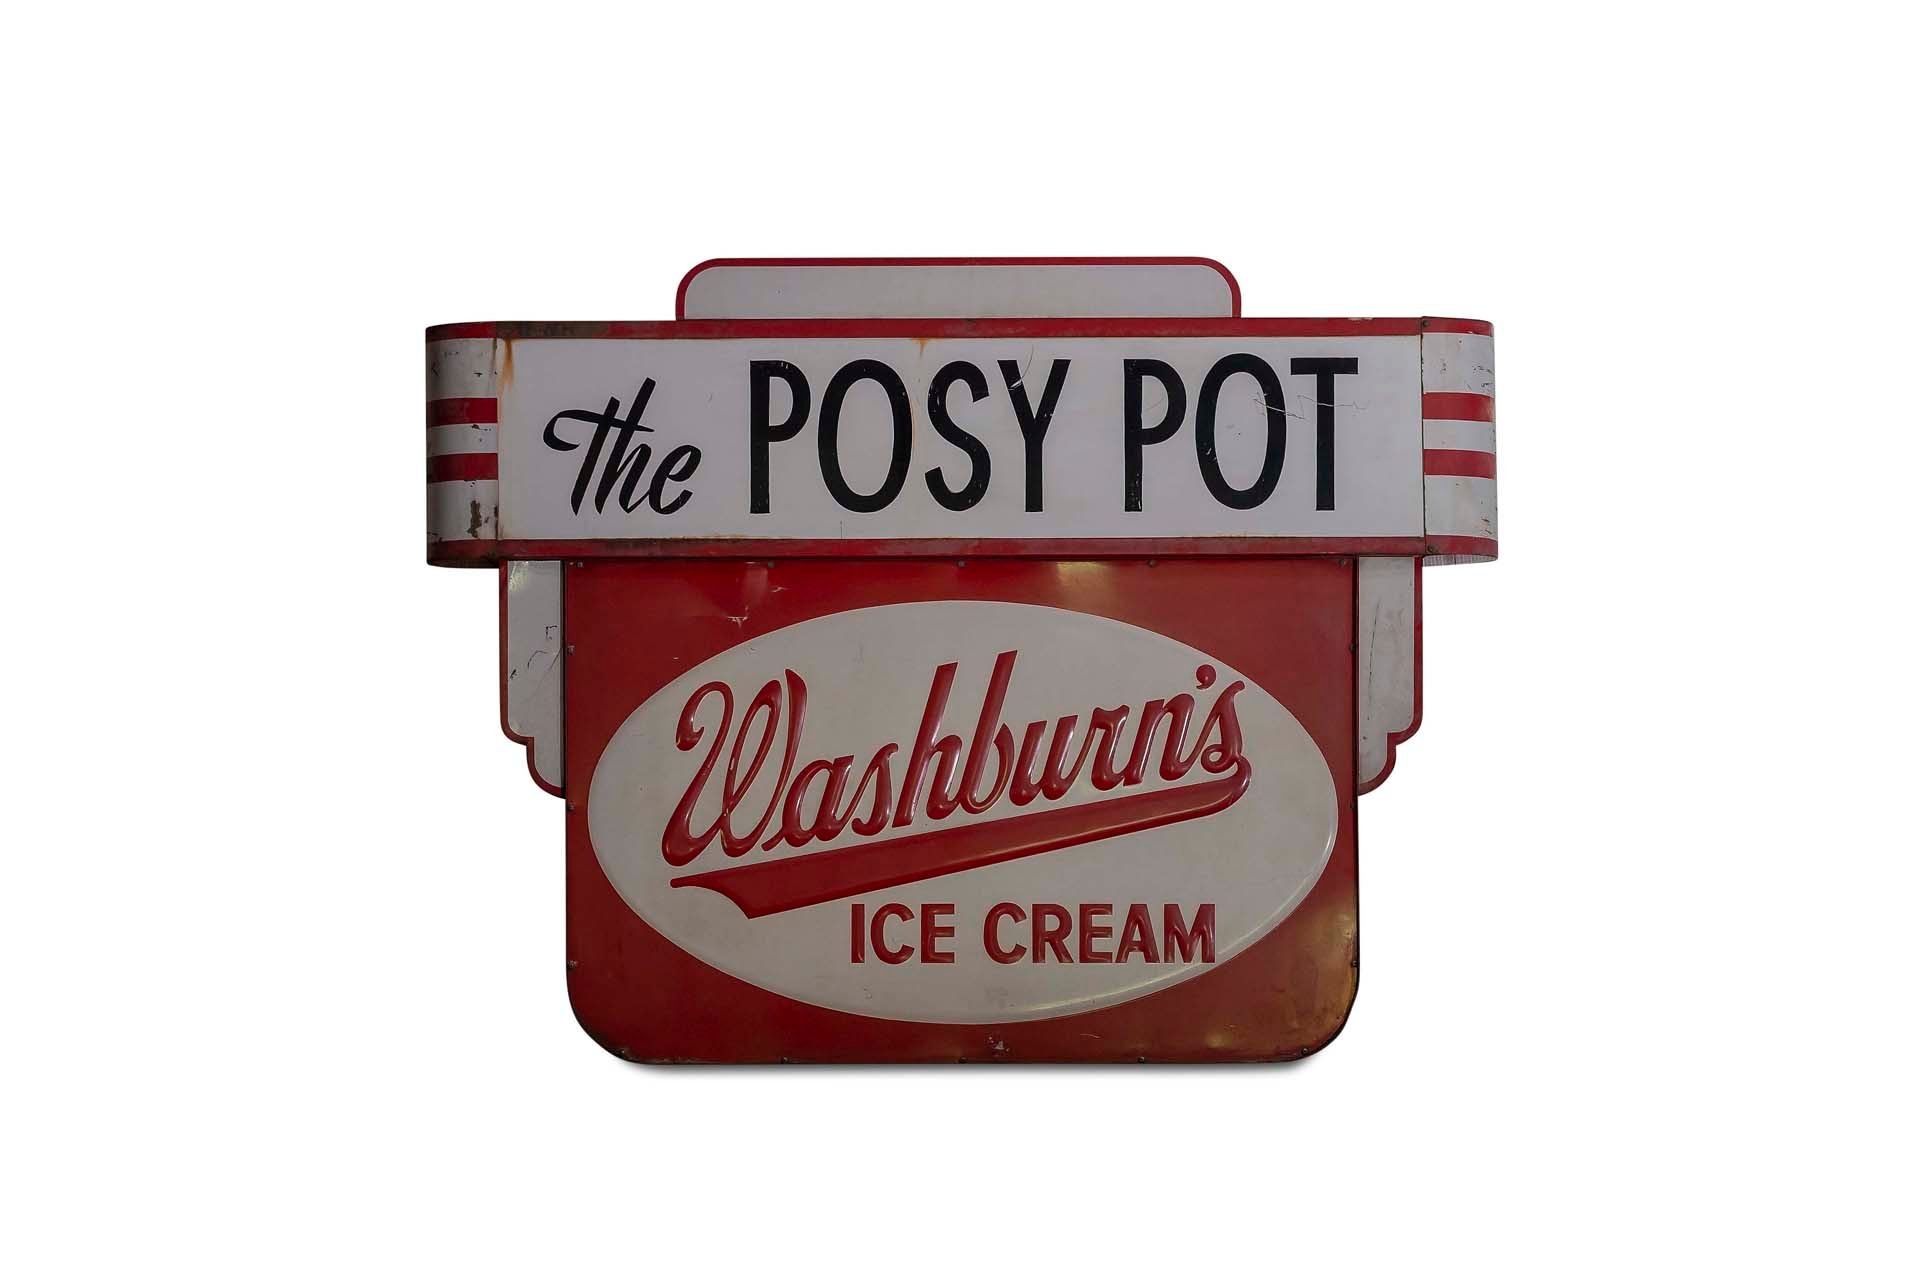 For Sale 'Washburn's Ice Cream, The Posy Pot' Hanging  Metal Sign, Double-Sided